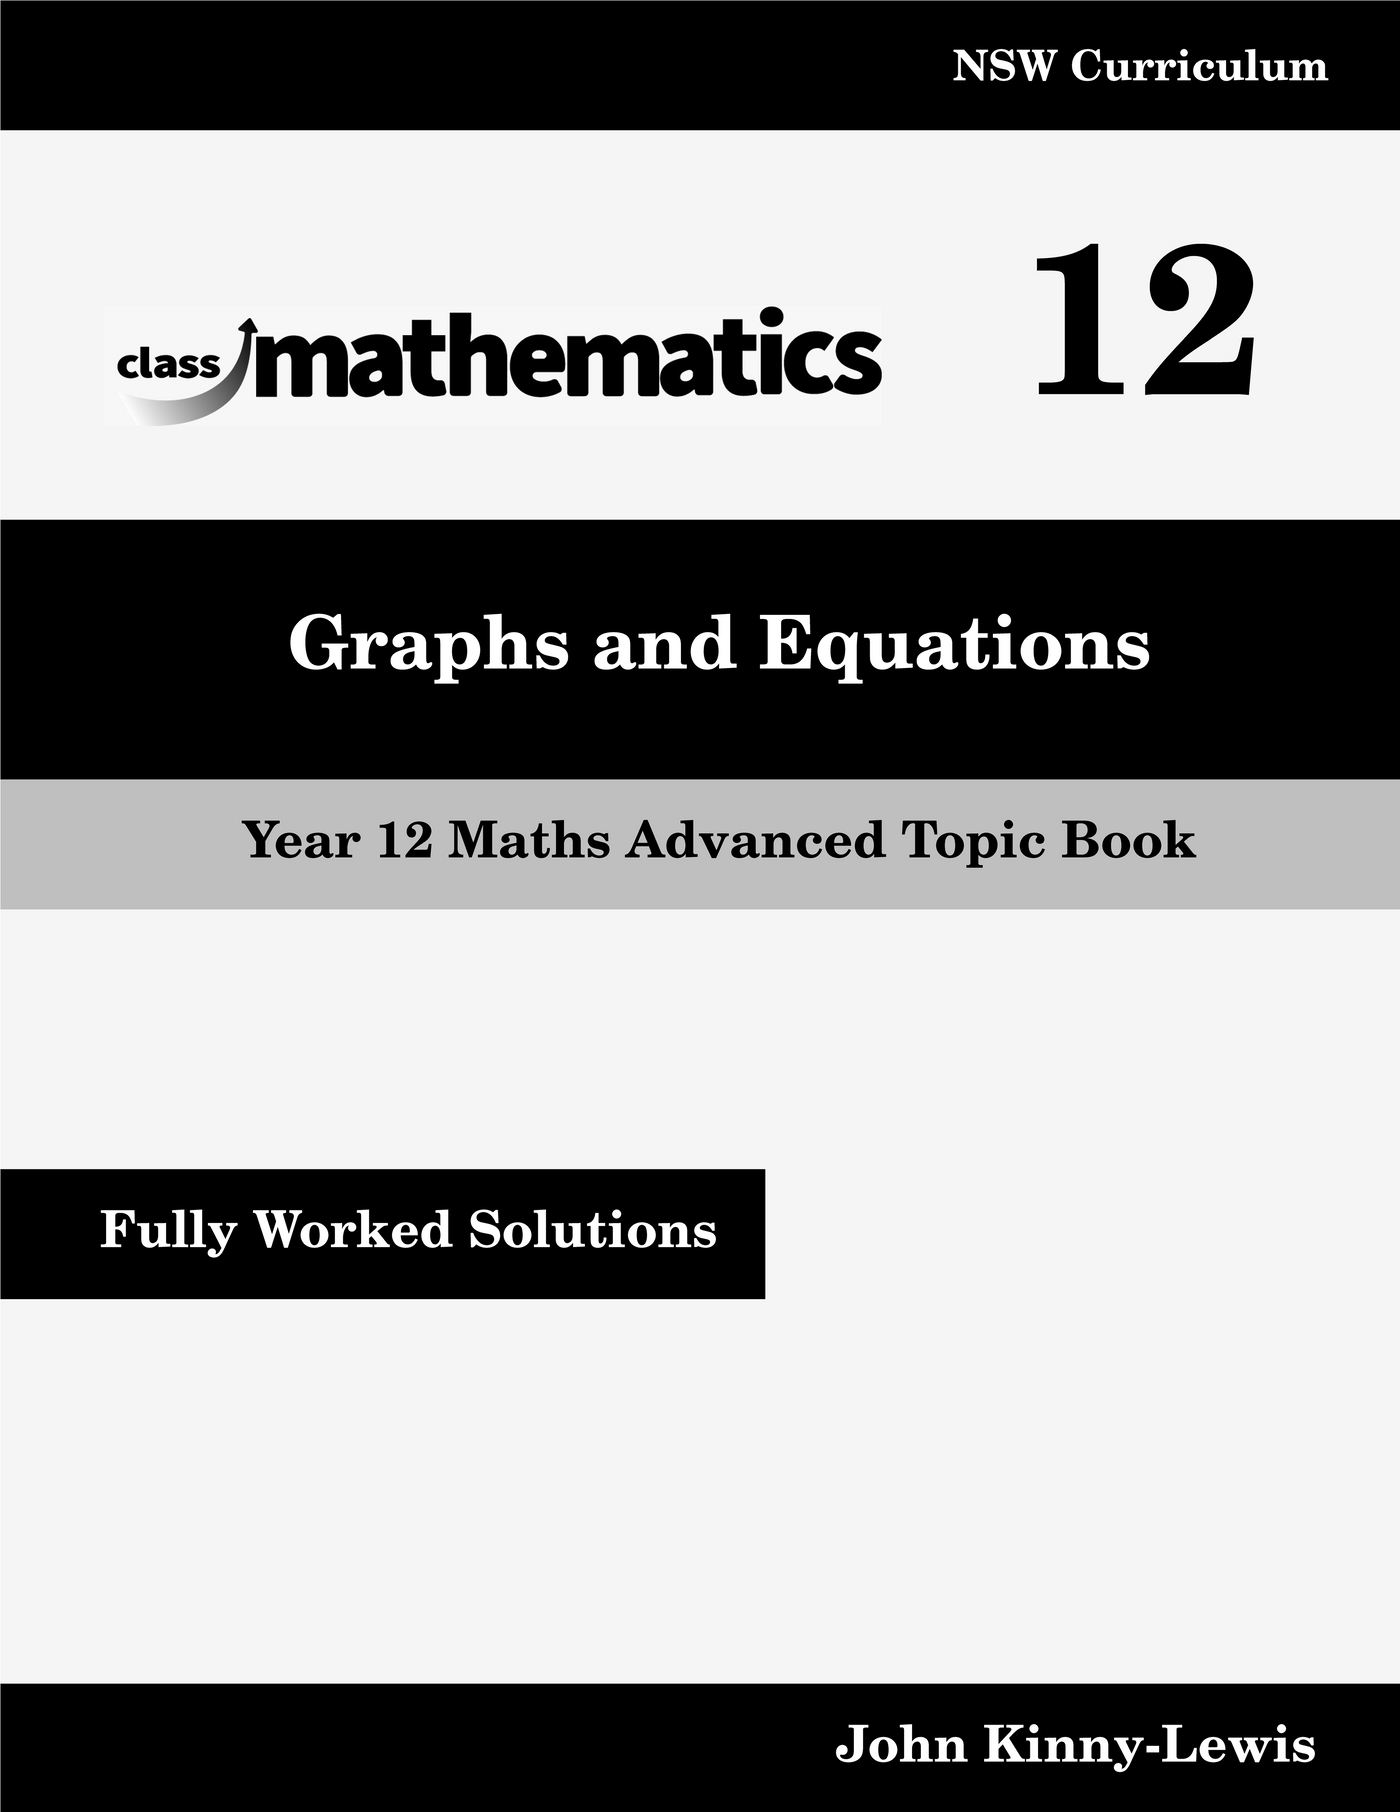 NSW Year 12 Maths Advanced - Graphs and Equations